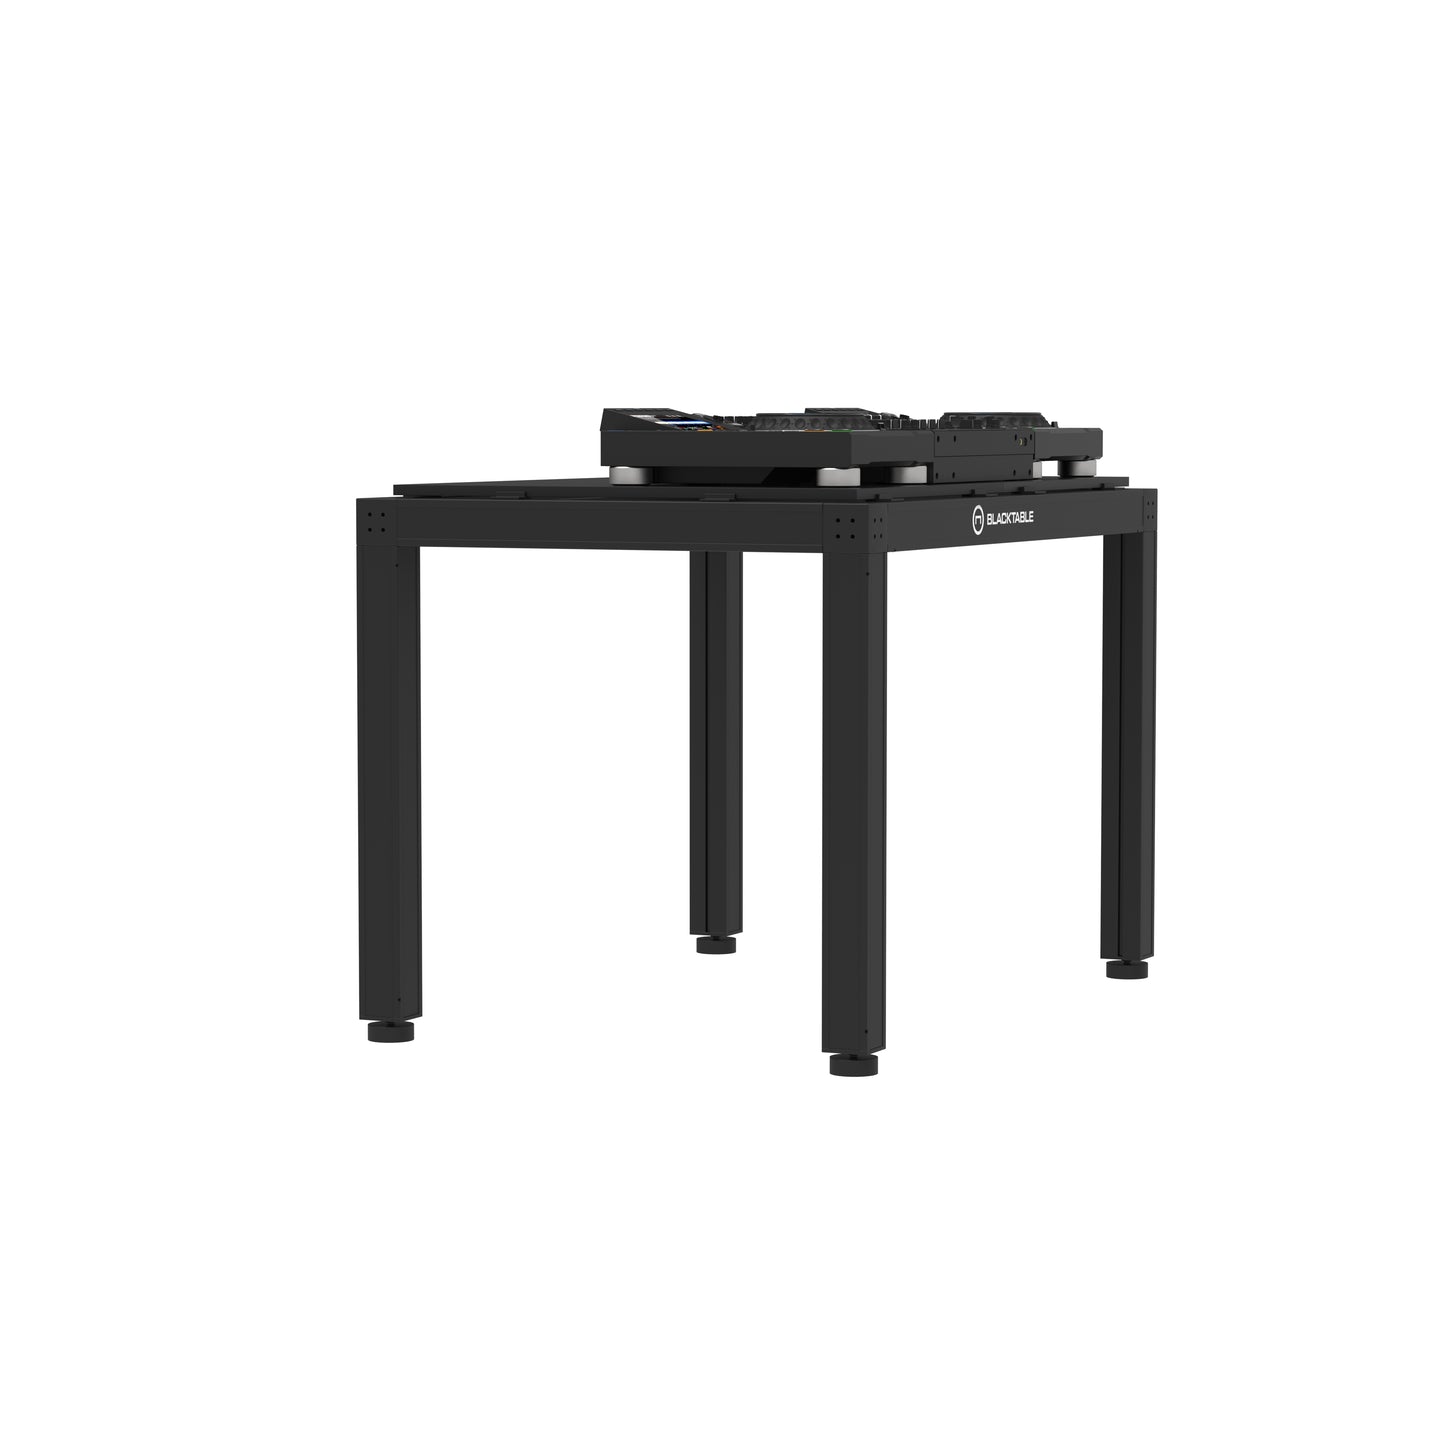 The super compact DJ table - blacktablepro